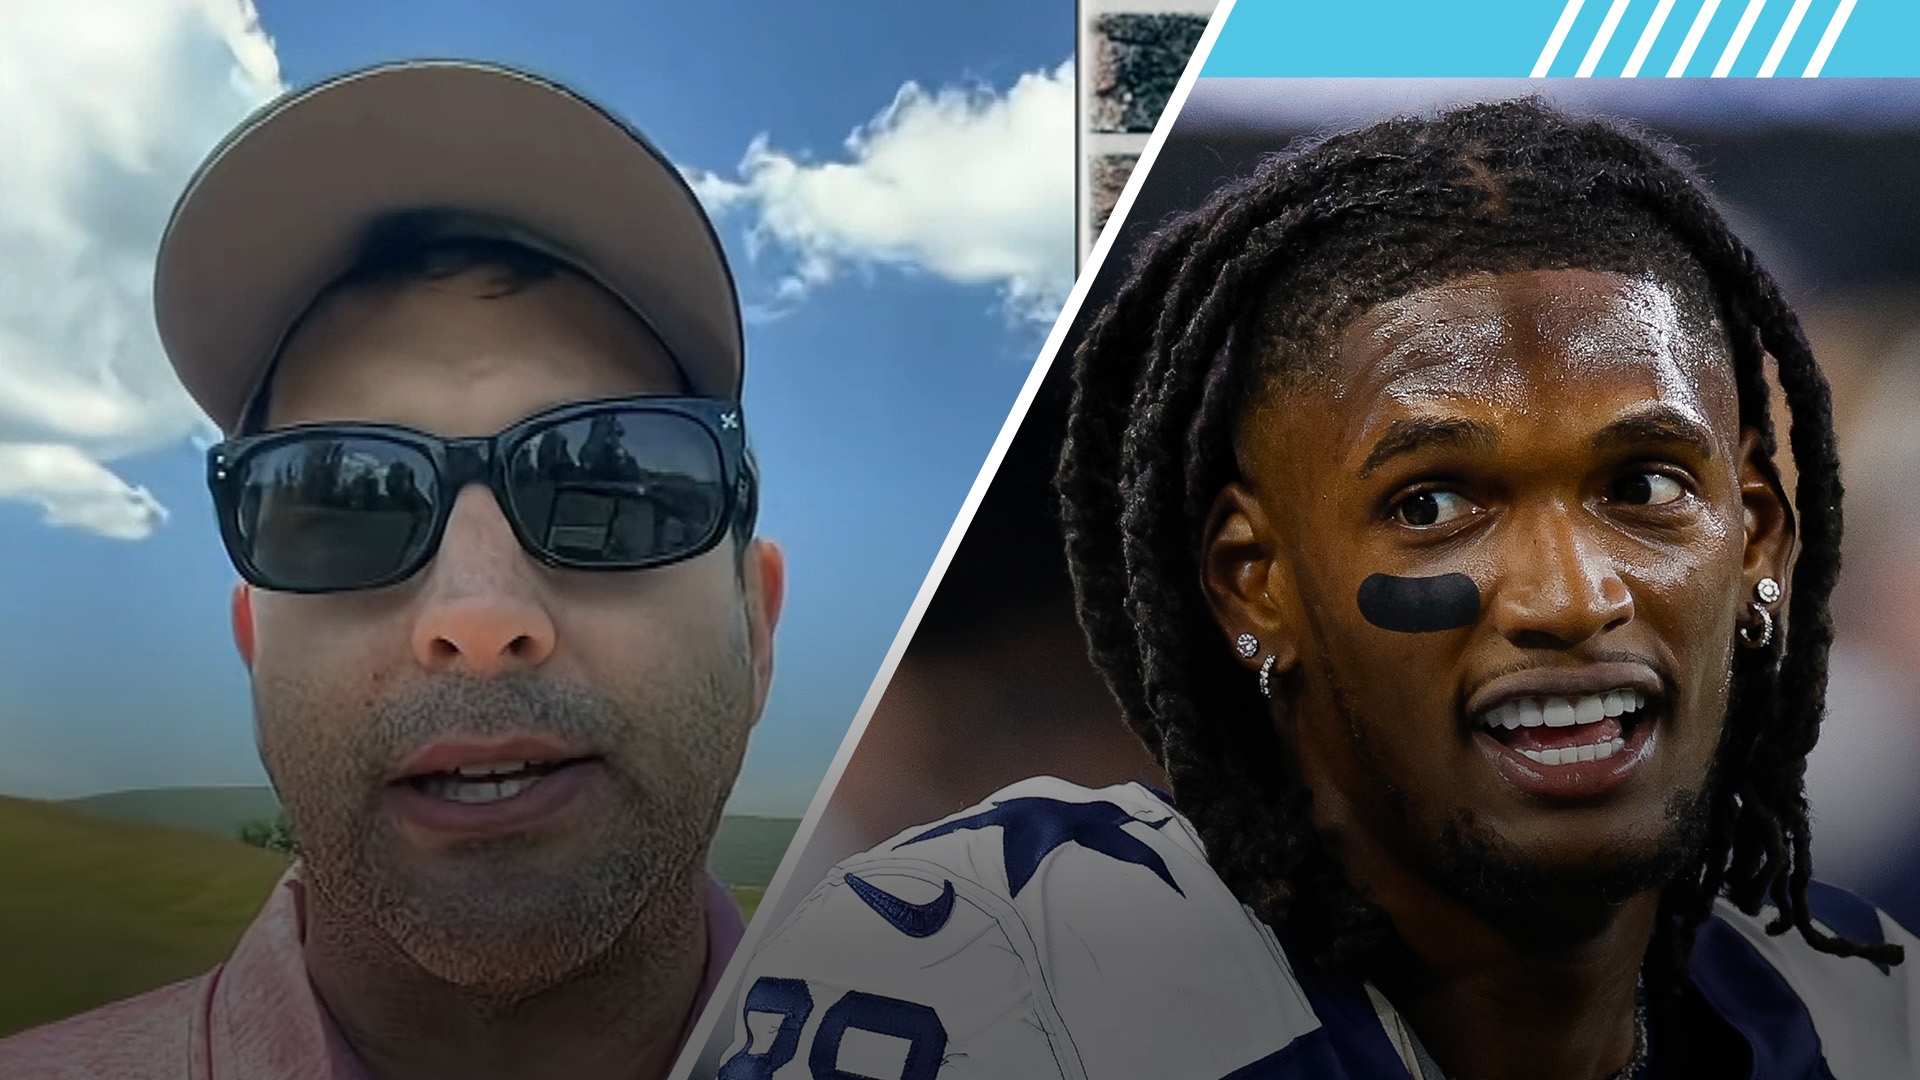 Schefter to McAfee: It's up to Cowboys, Lamb to figure out deal